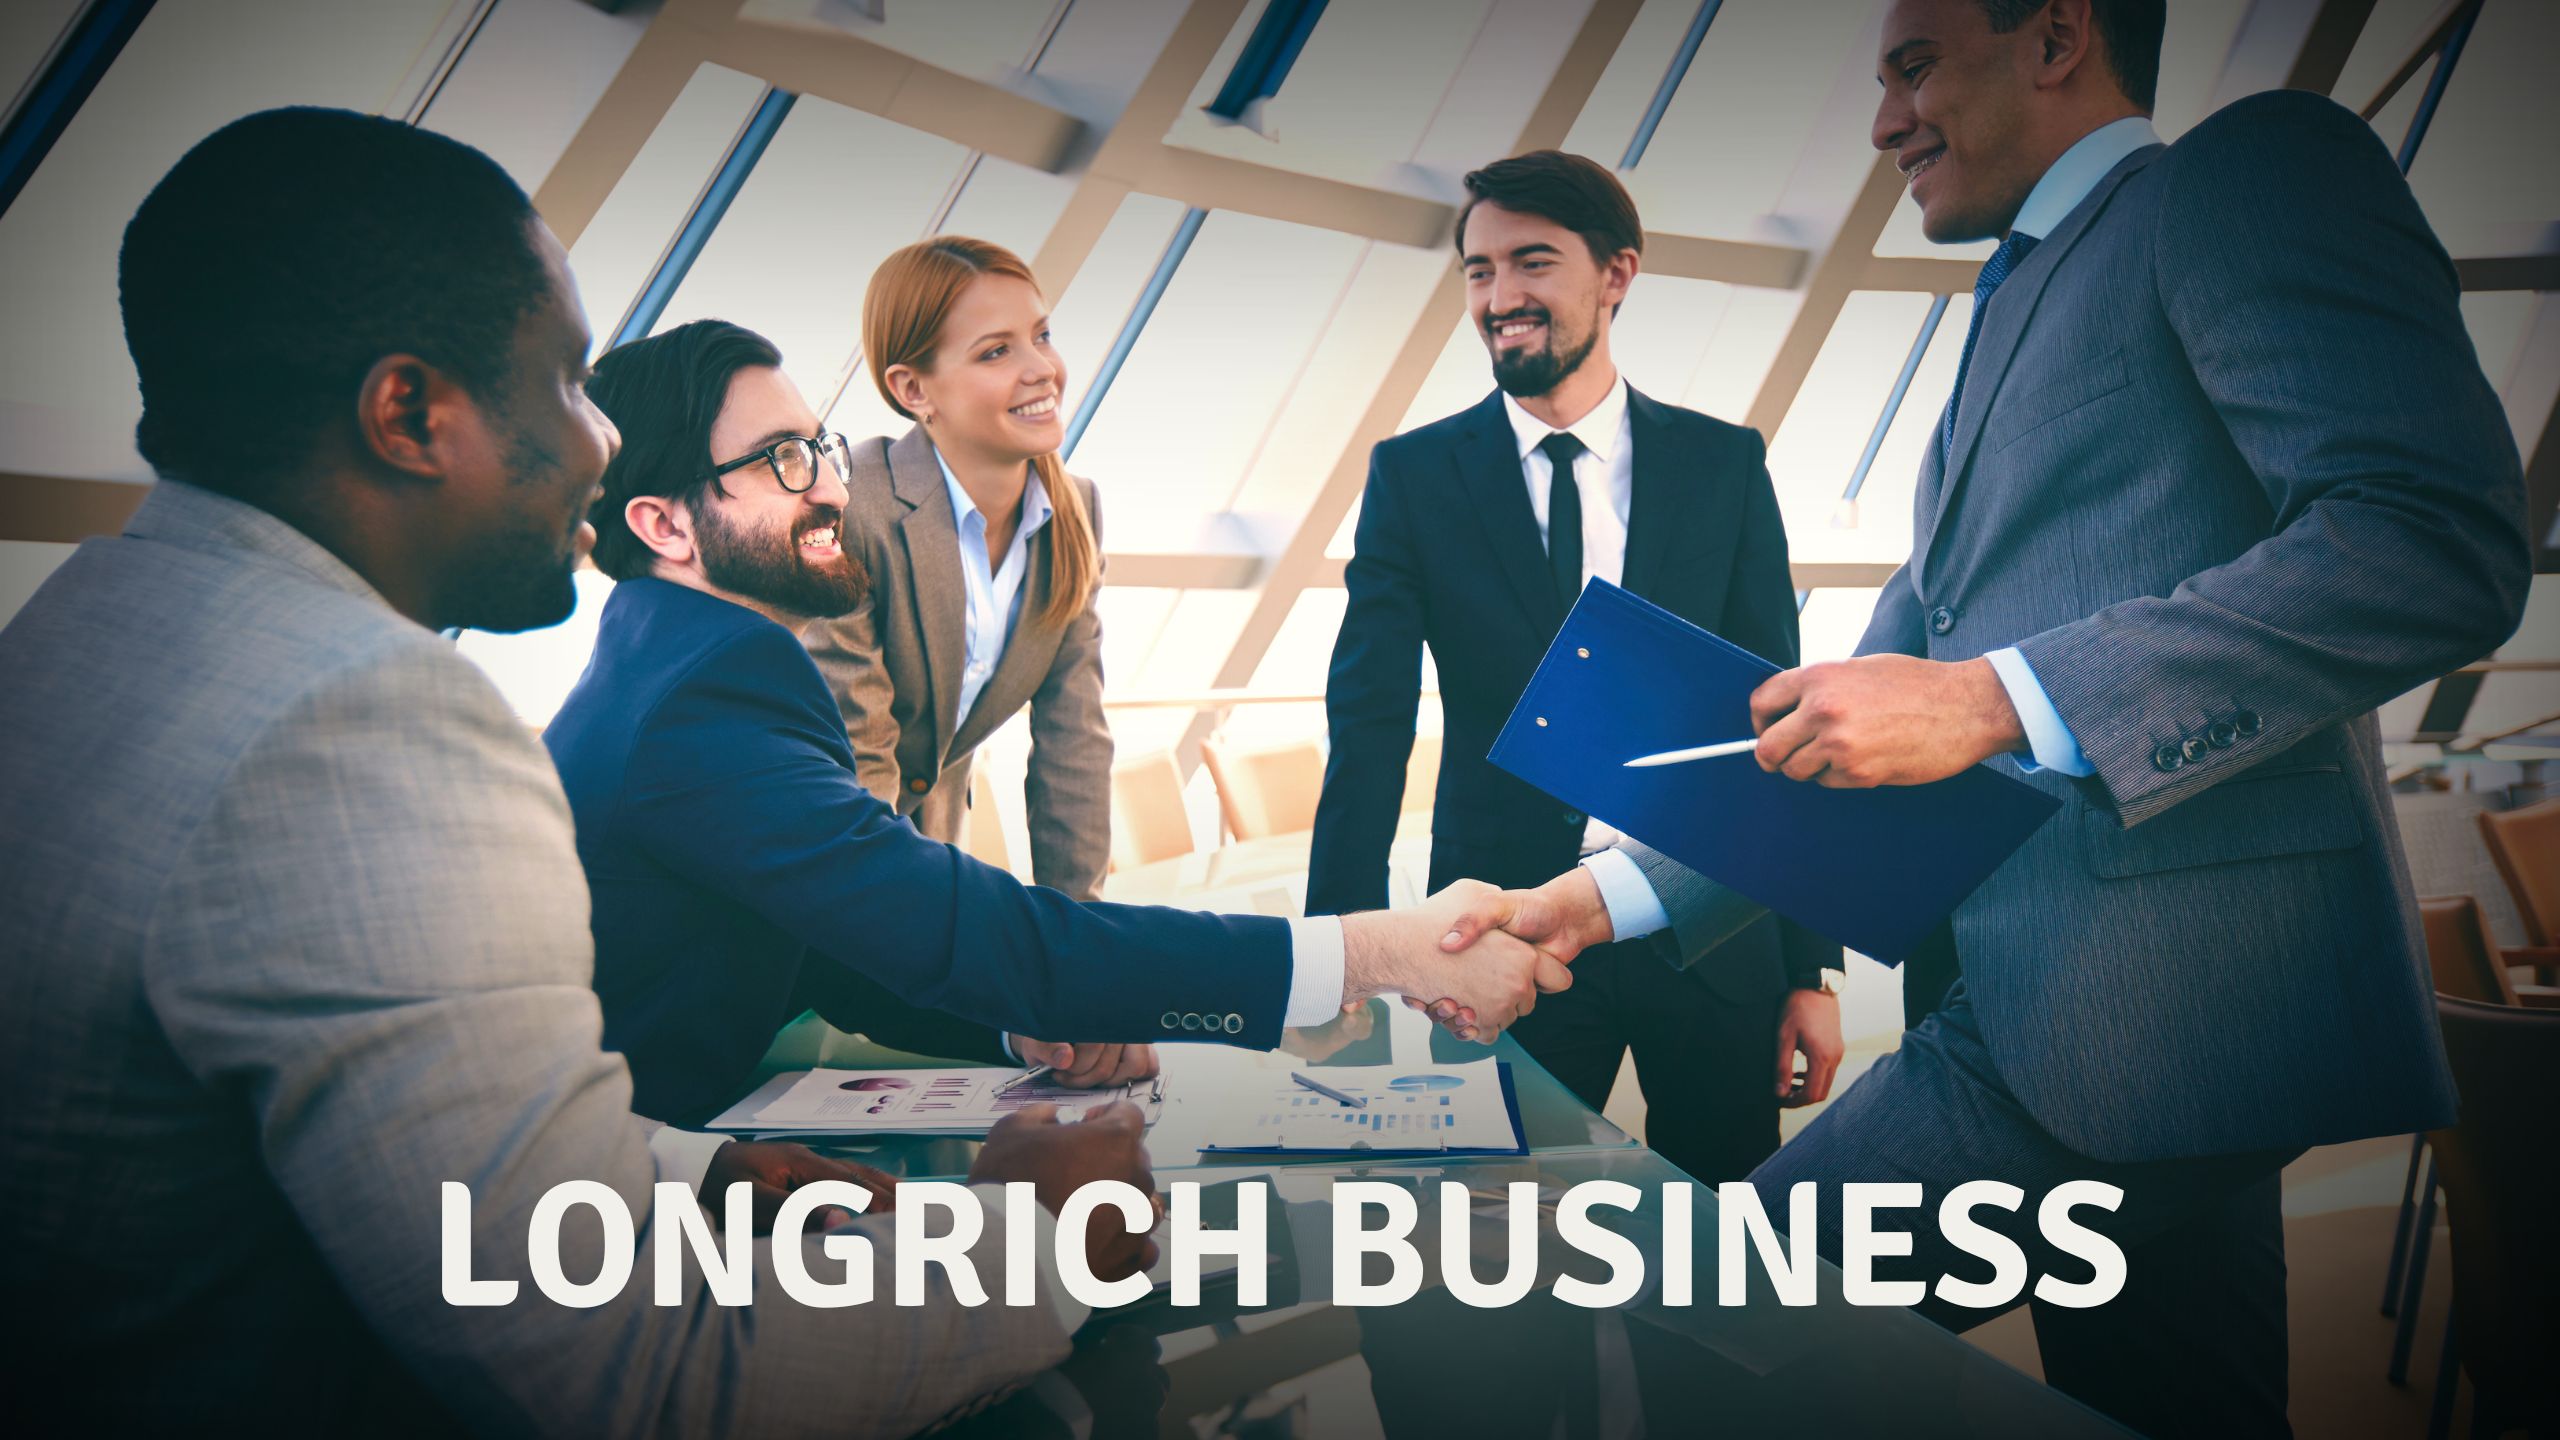 Longrich Business - Unlocking Financial Independence